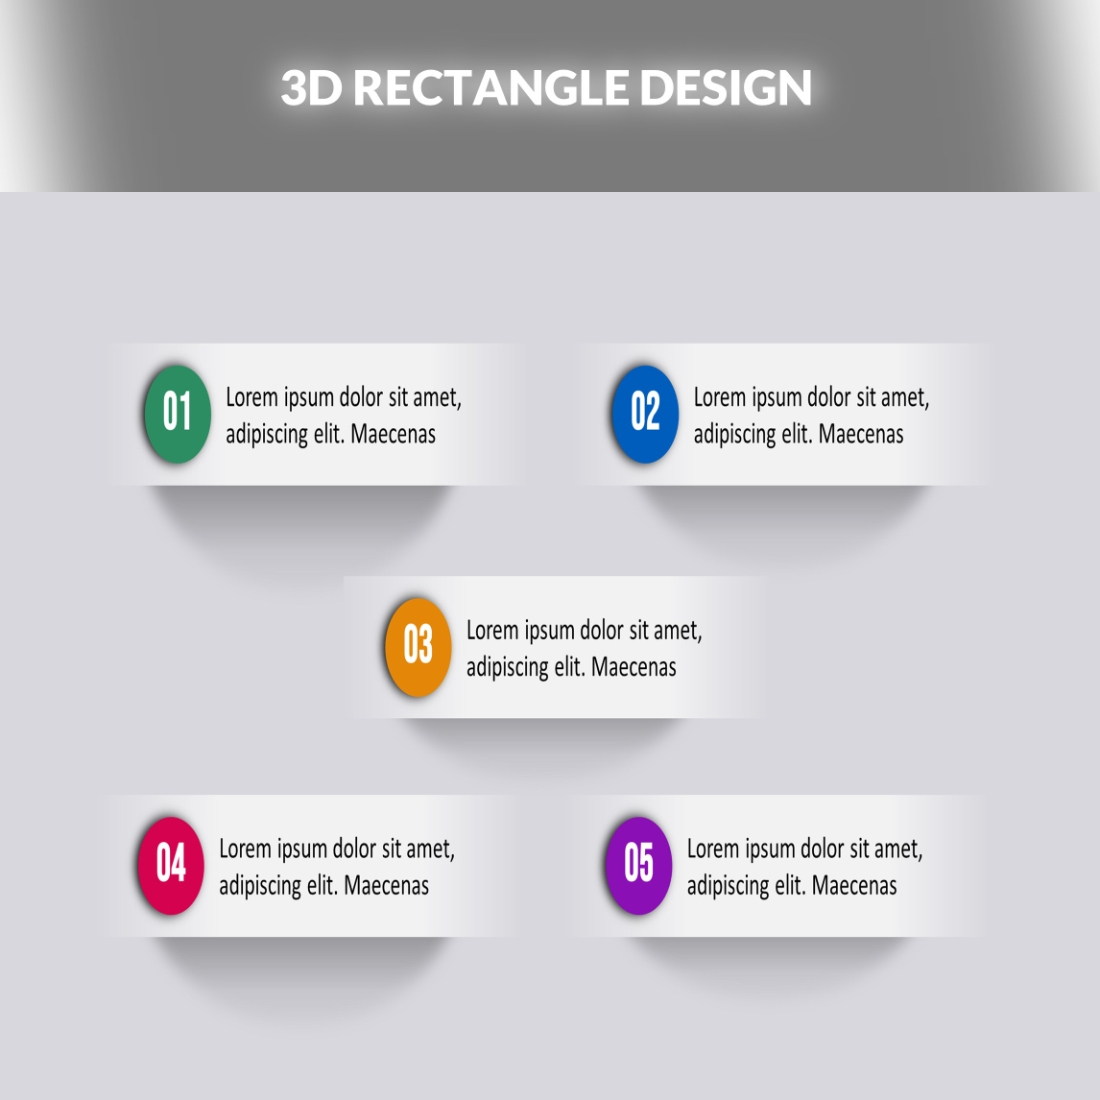 Creative 3D WALL DESIGN RENTANGLE Illustration 3D RECTANGLE preview image.